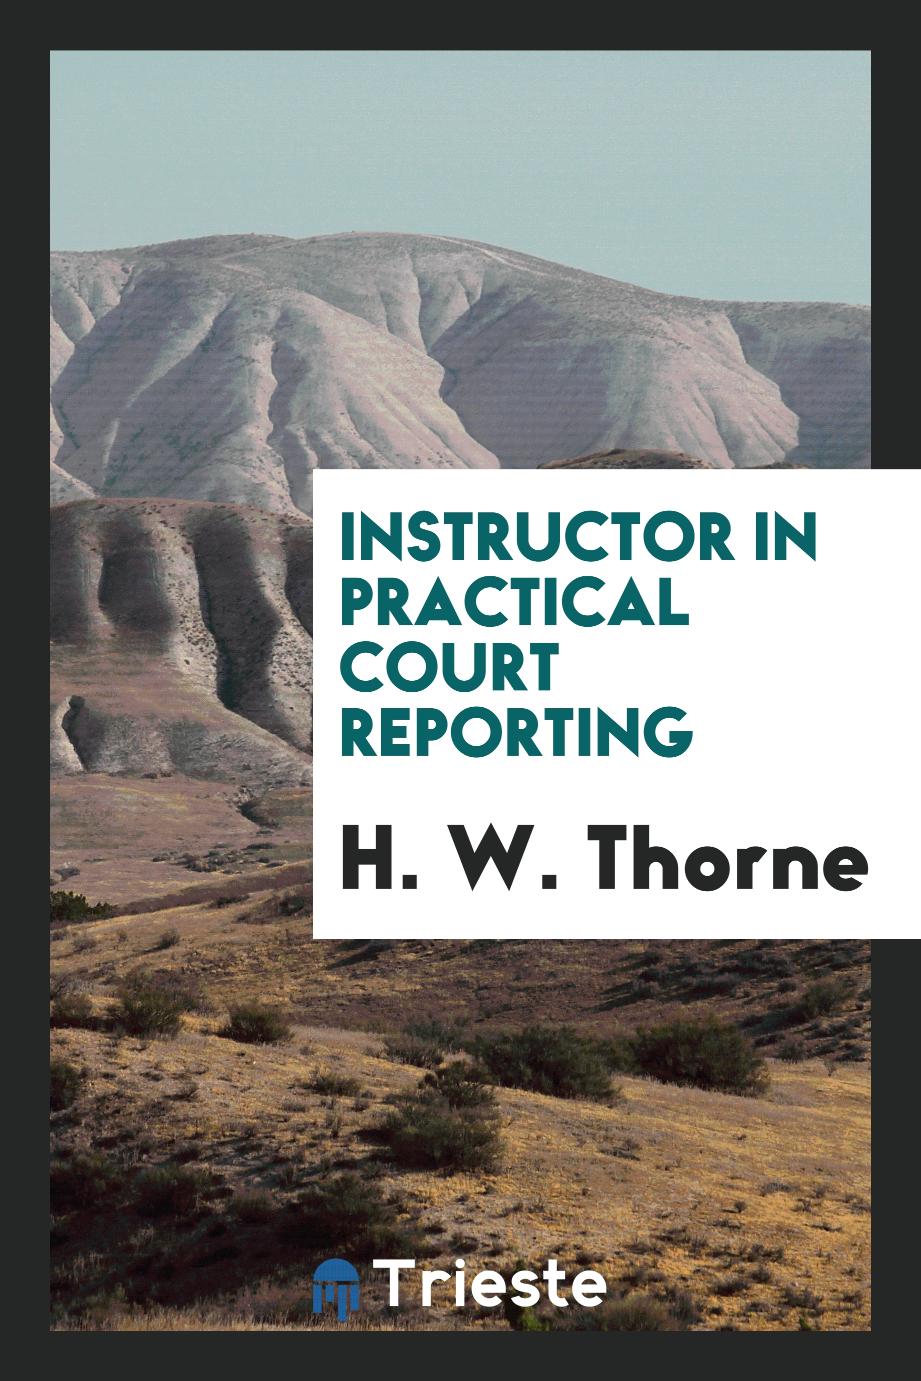 Instructor in practical court reporting